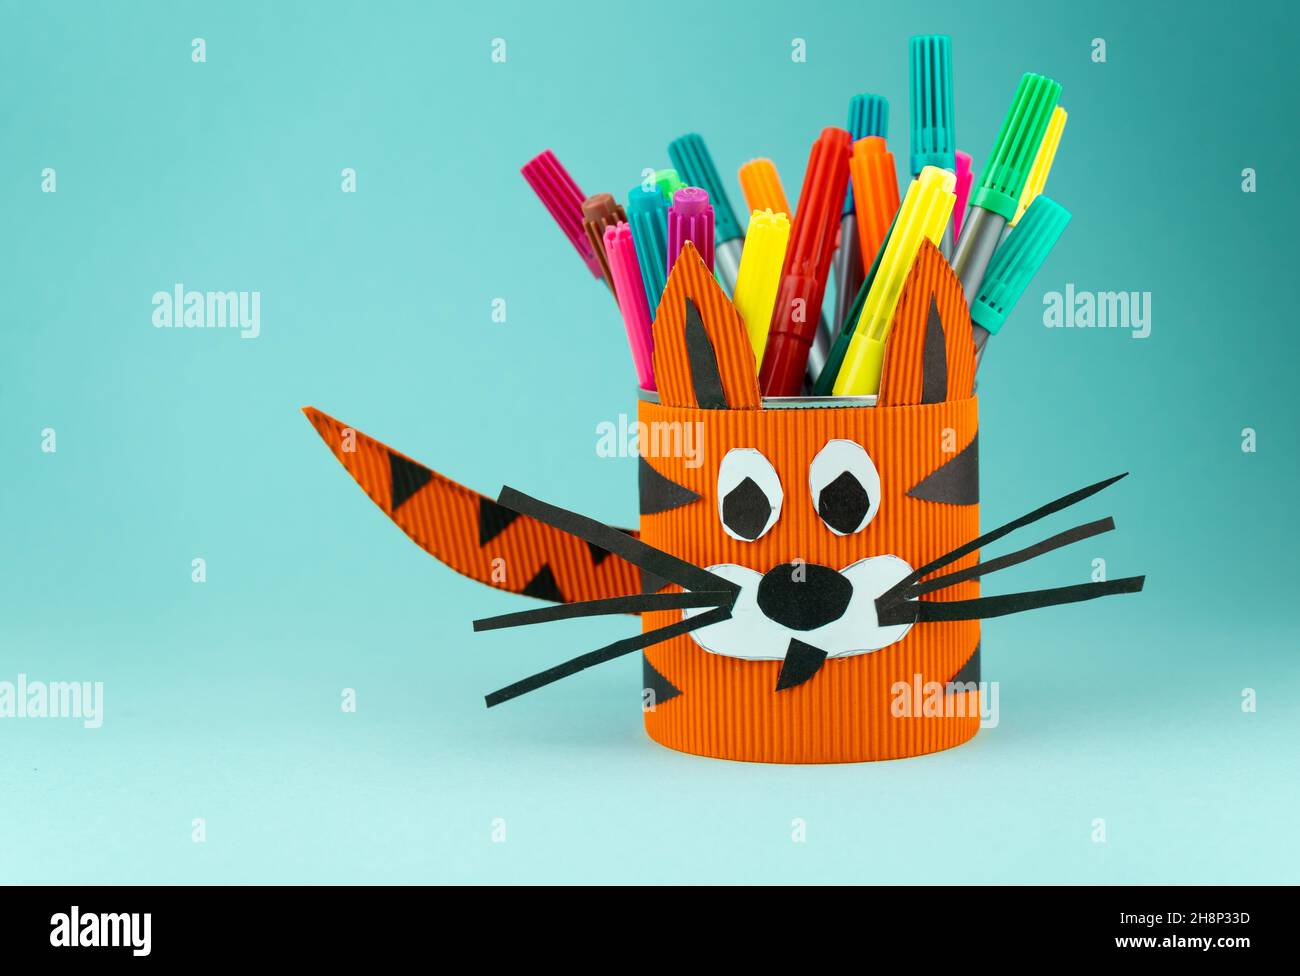 Step-by-step instructions on how to make a stand for stationery from a tin can. Tiger made of paper and cardboard, scissors and glue. A fun DIY craft for children. Do it yourself paper tiger. Stock Photo